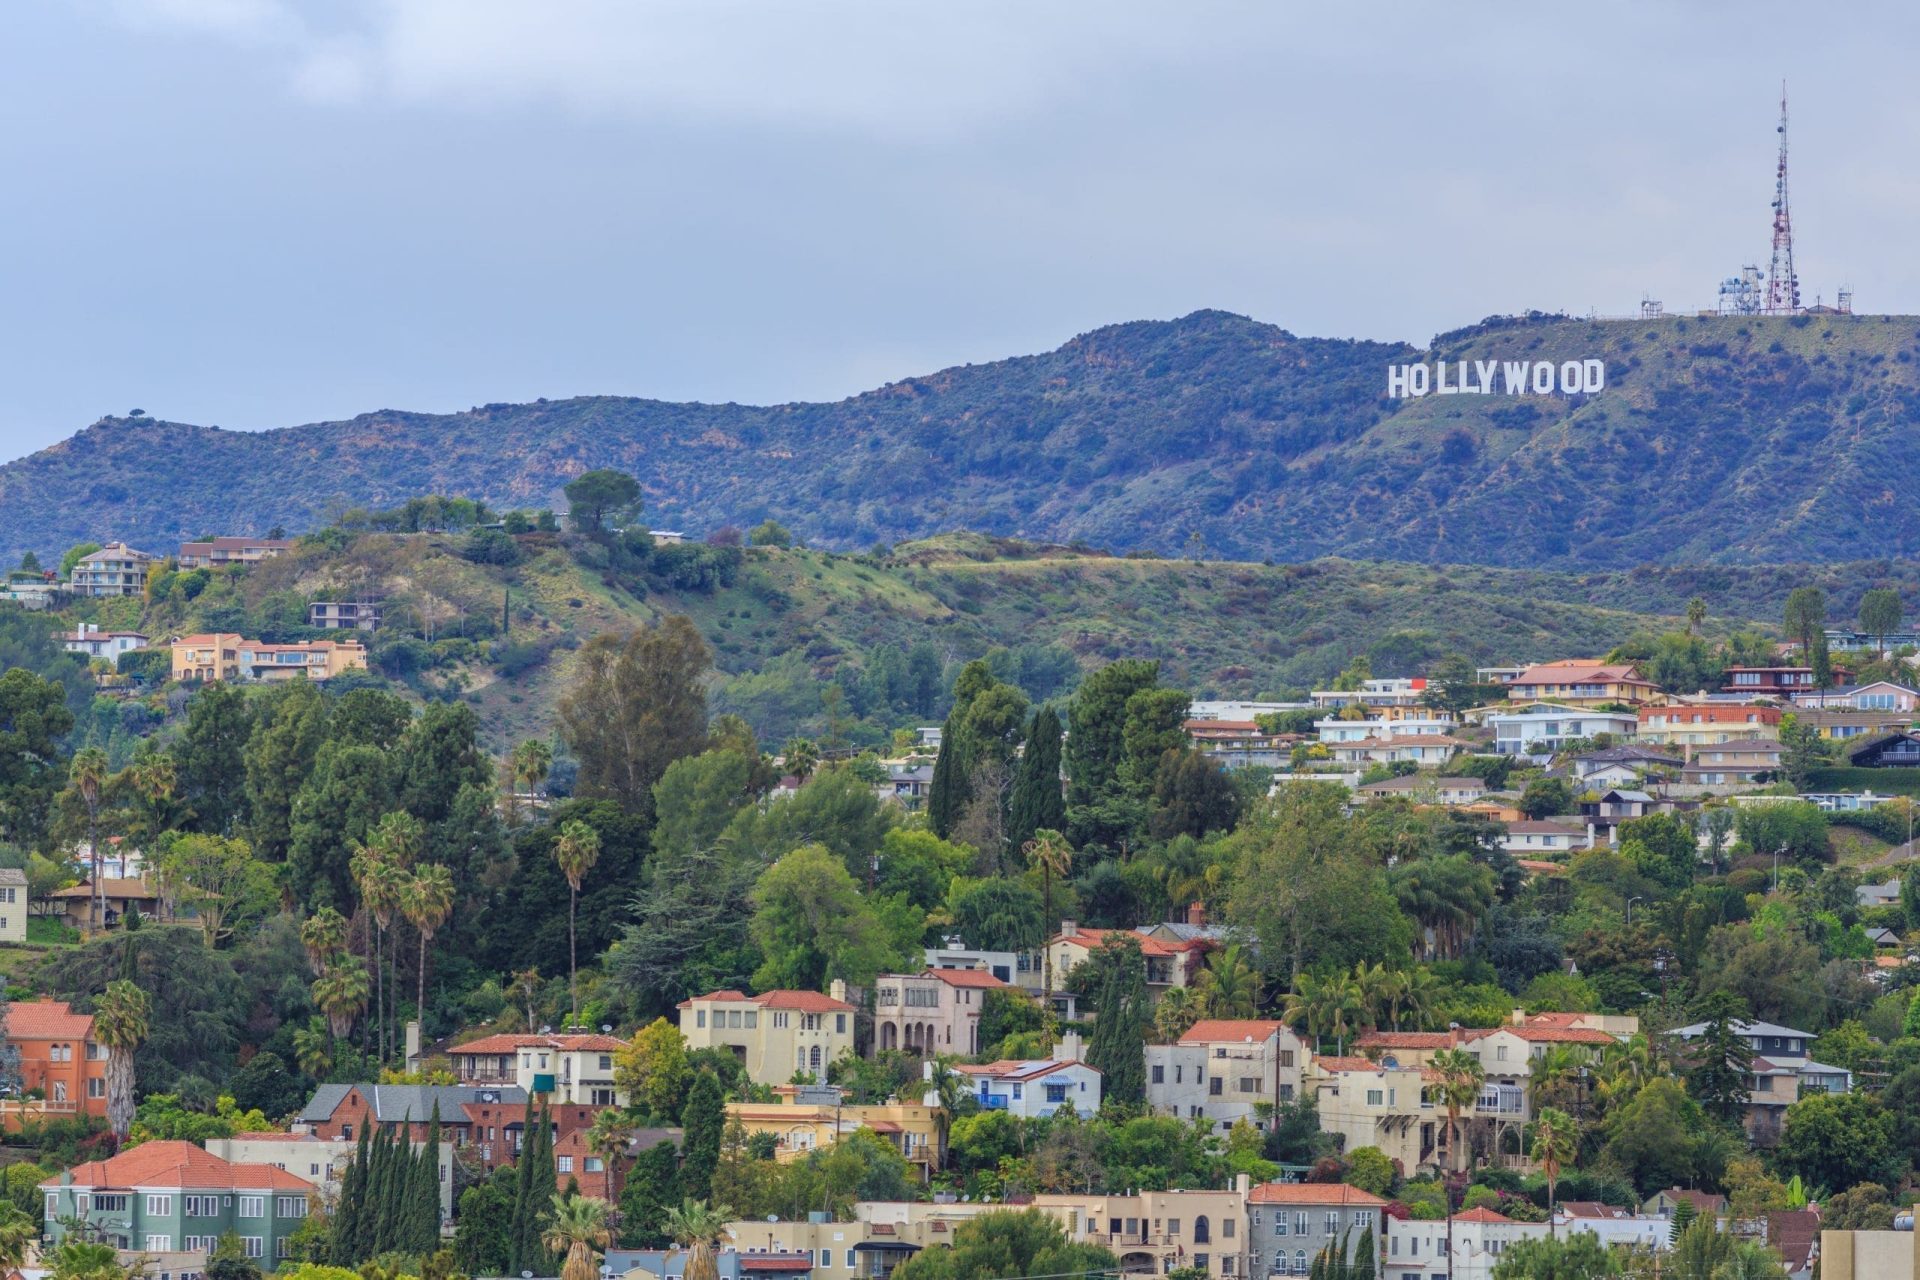 How to Book a Hollywood Celebrity Home Tour